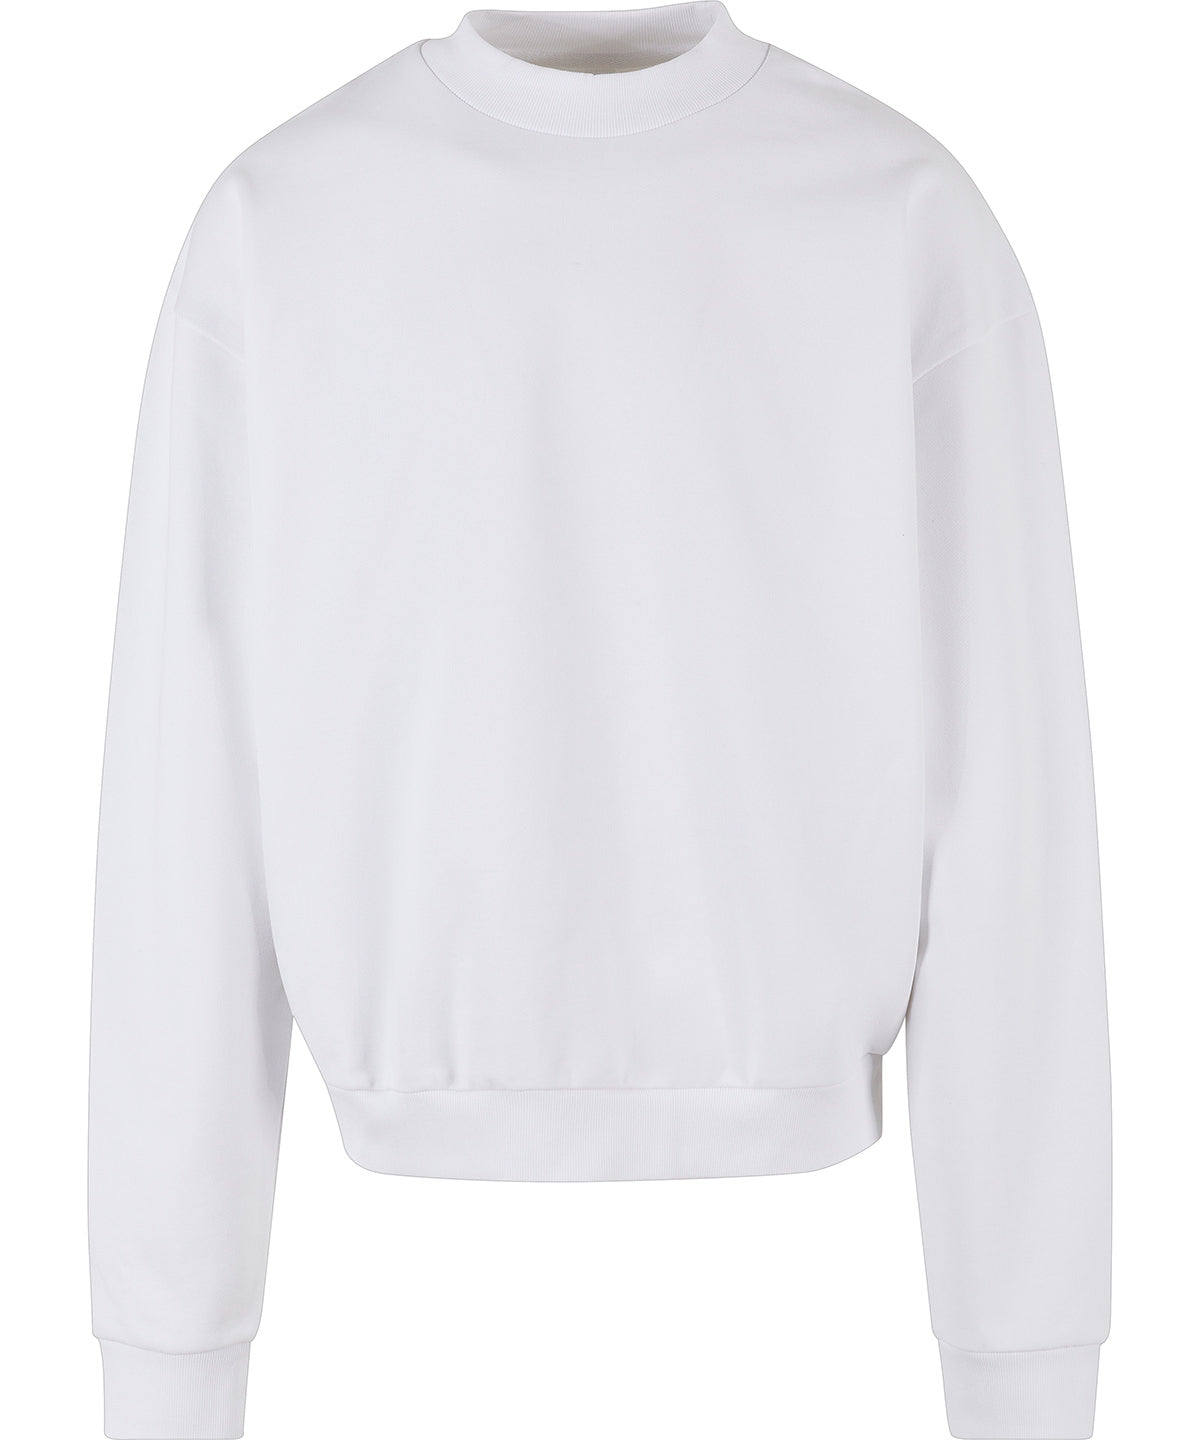 Build your Brand Ultra-heavy cotton crew neck BY205 - COOZO